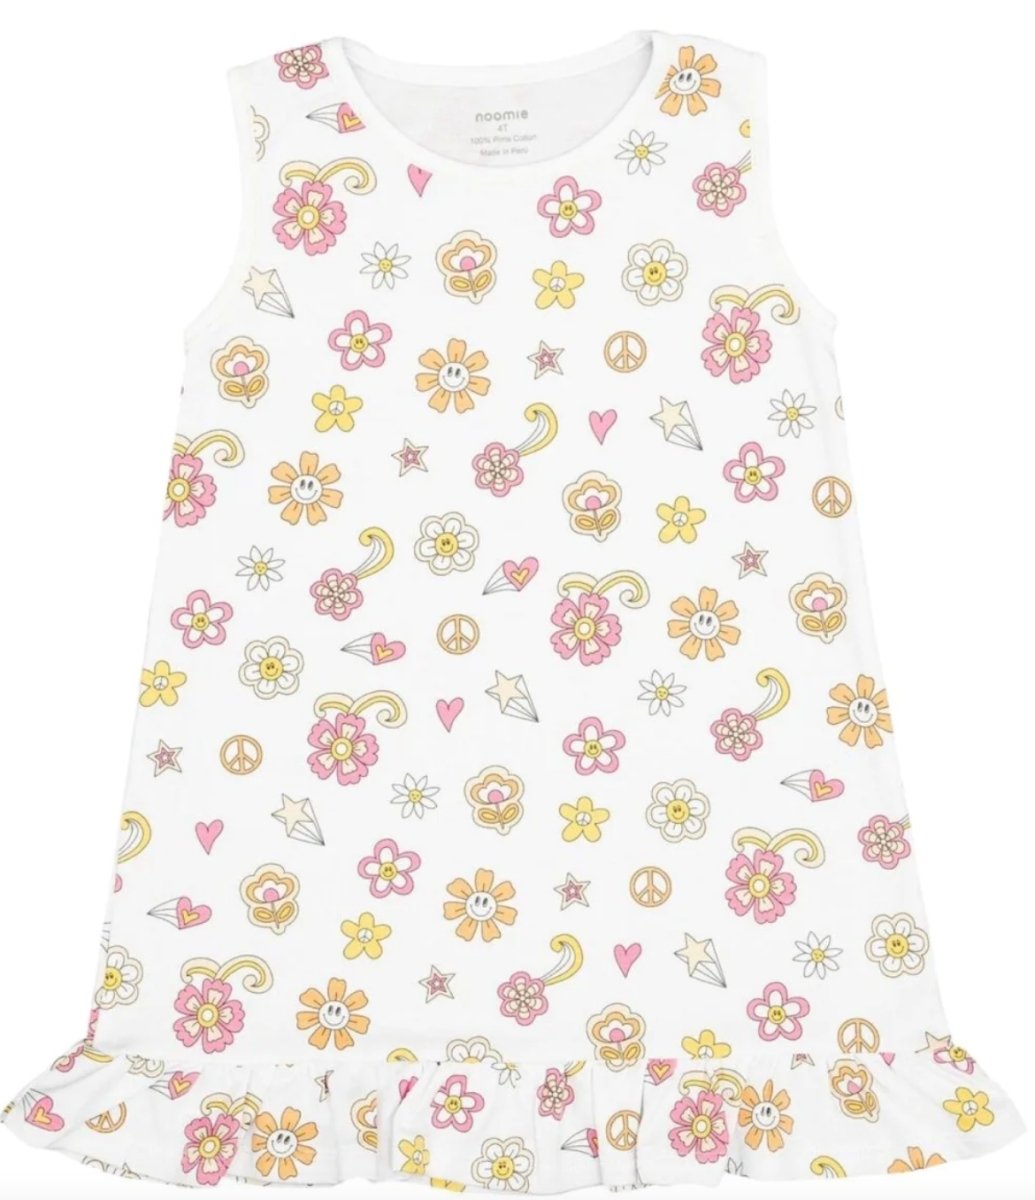 Snuggle Up With Your Mini in These 5 Best Noomie Baby Pajamas - Mini Dreamers